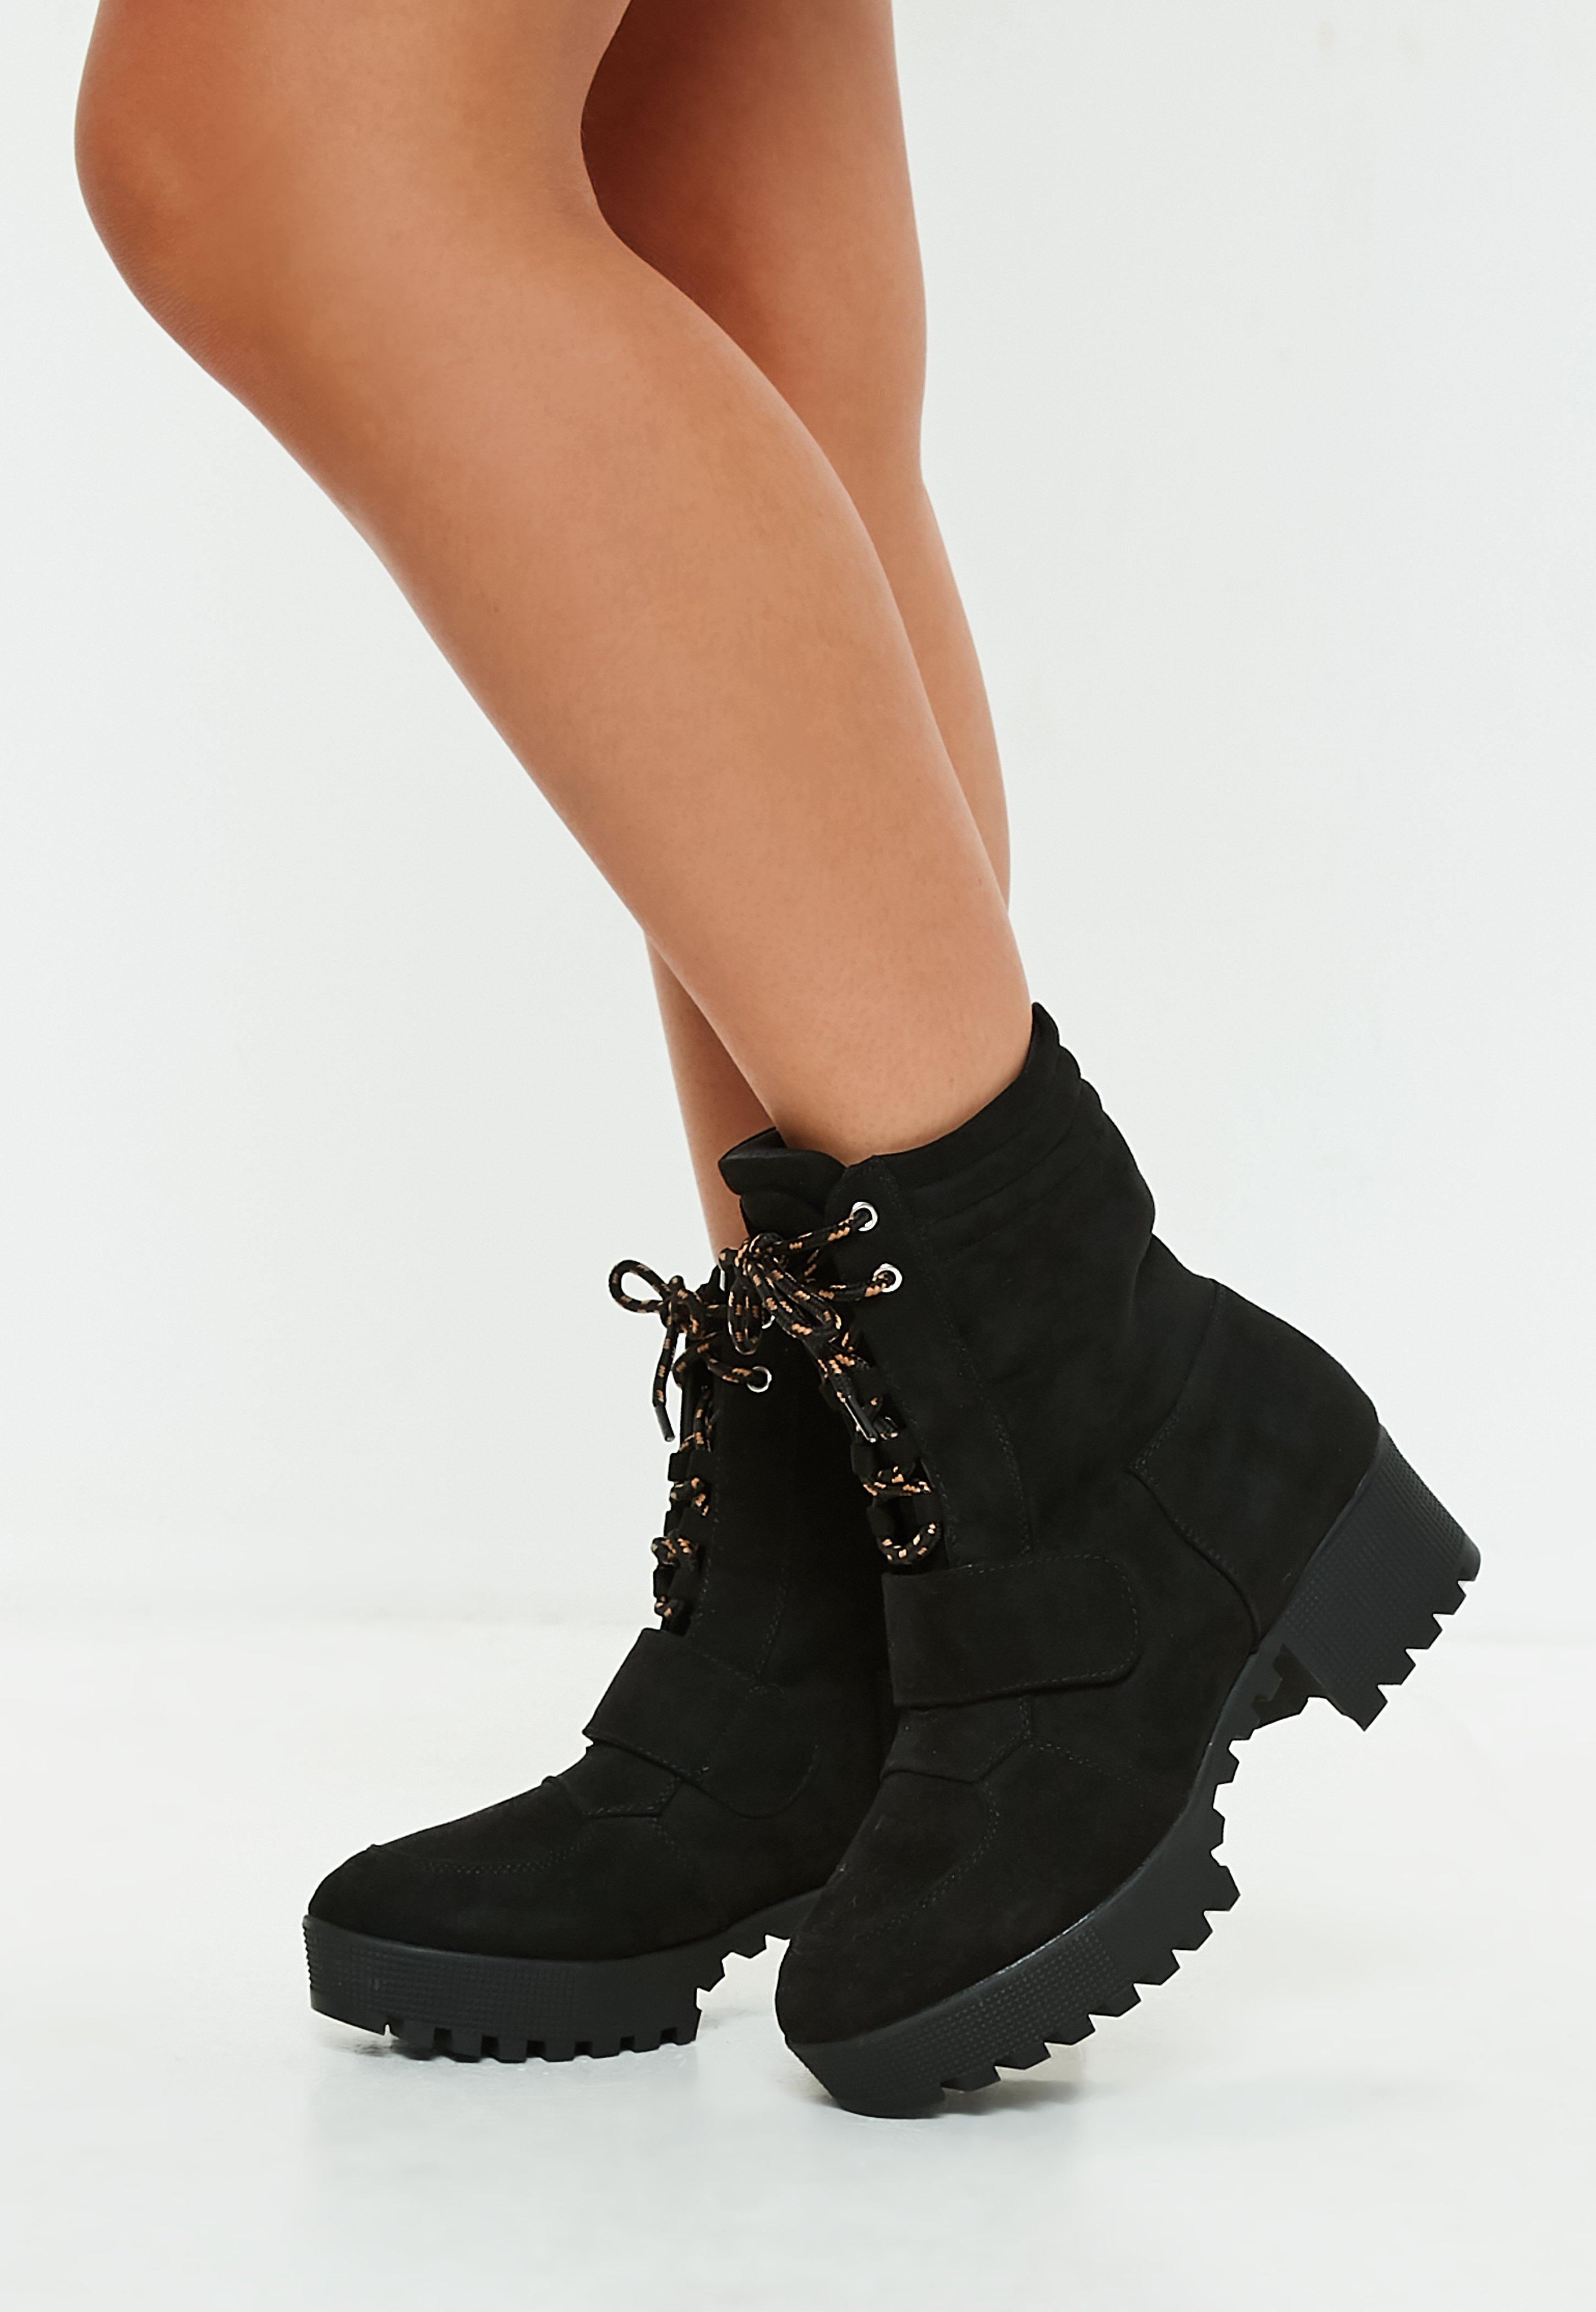 Missguided Black Faux Suede Hiking Flat Strap Ankle Boots - Lyst